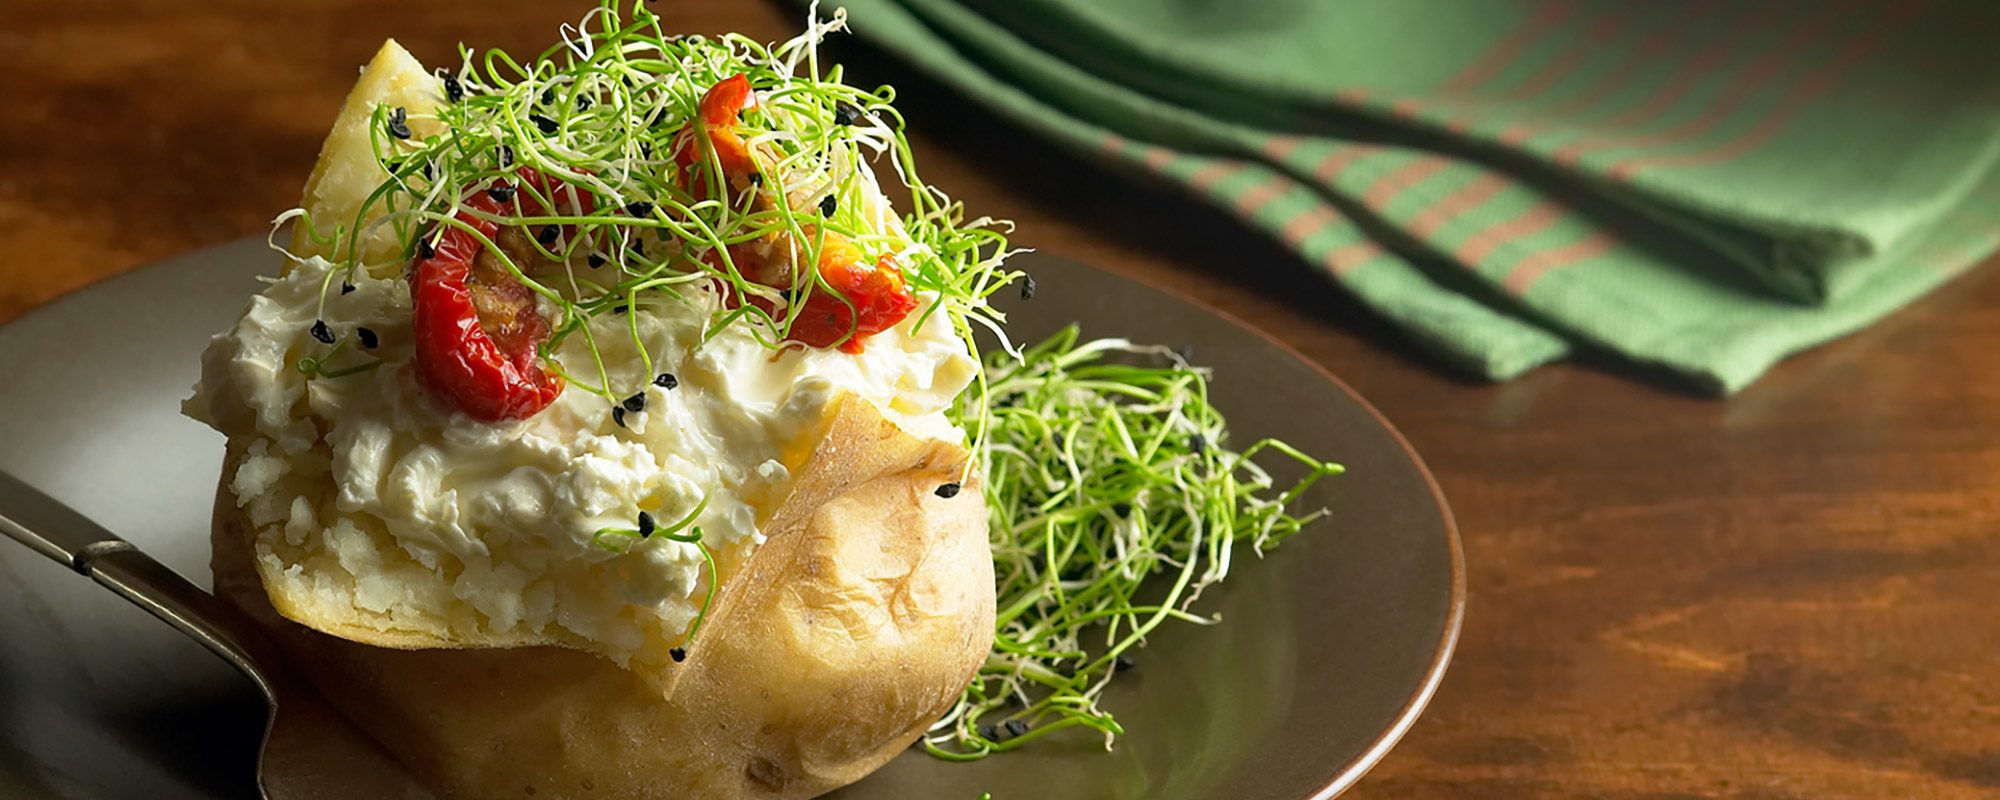 Garlic chives, jacket potato and cottage cheese